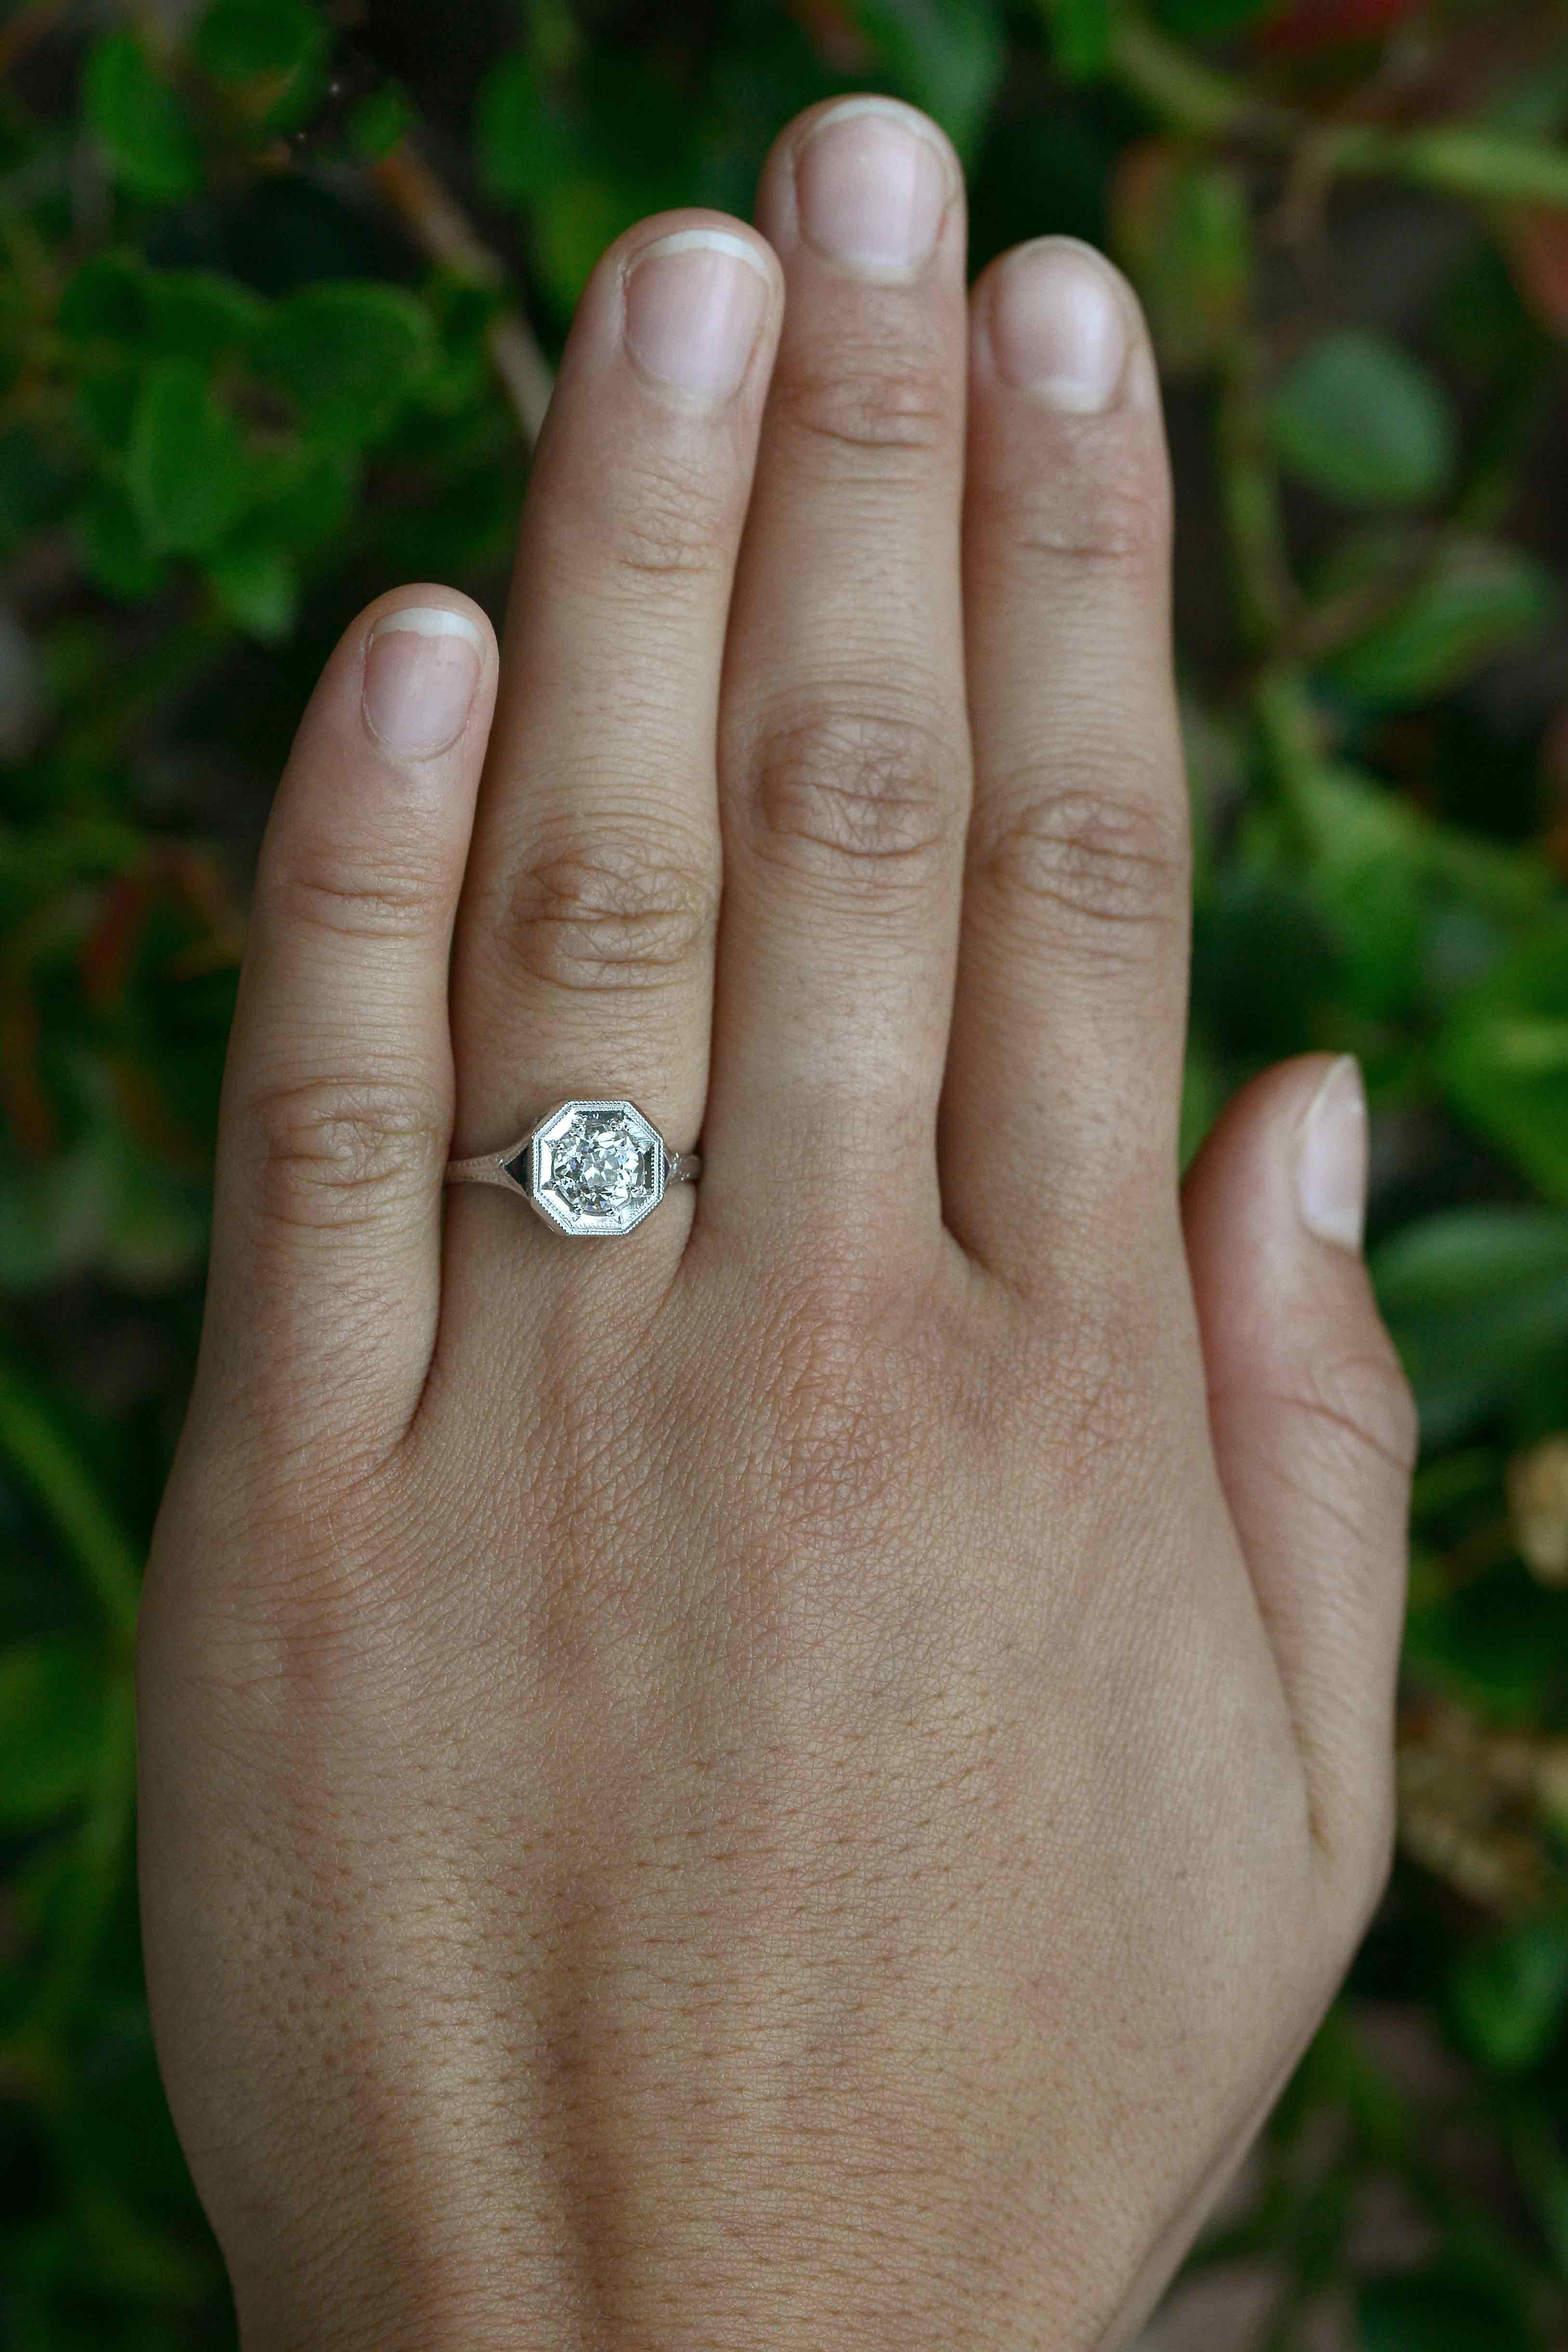 The Montecito antique engagement ring. The captivating and sleek geometric lines of this original antique Art Deco diamond engagement ring are just the beginning of the story. Centered by a chunky fireball shooting sparkles everywhere, the old